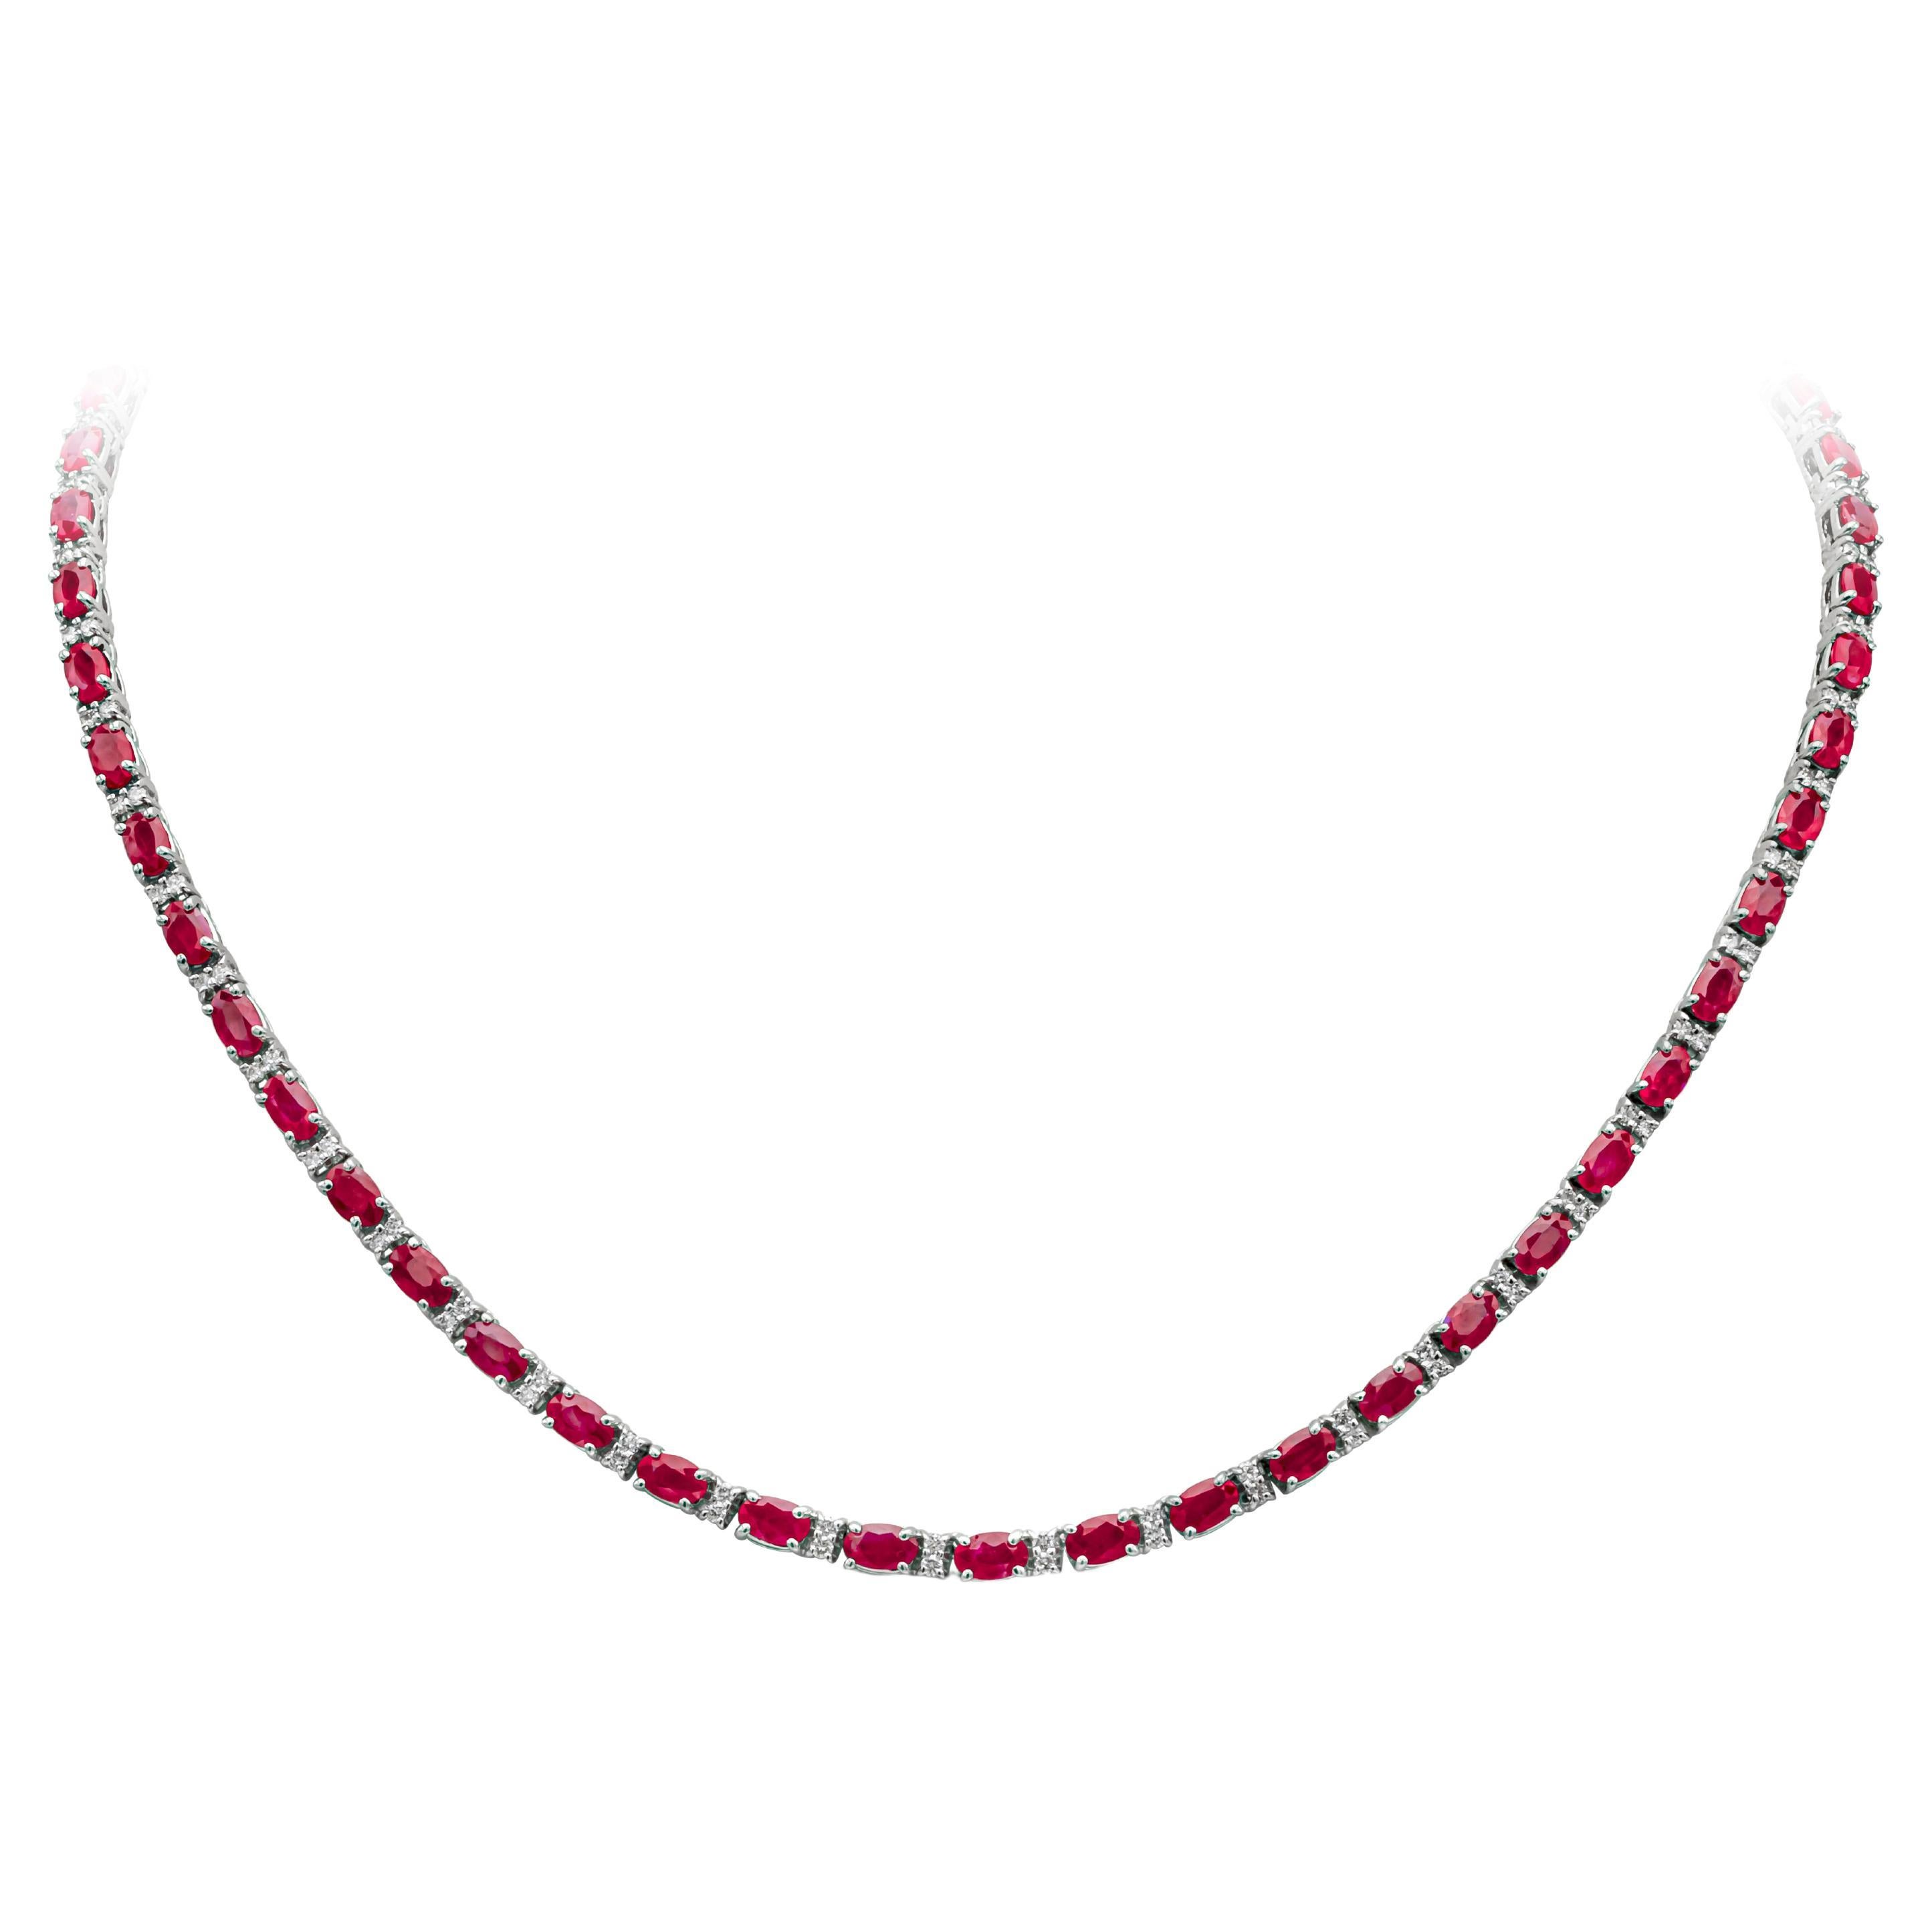 Roman Malakov 16.89 Carats Total Oval Cut Ruby and Diamond Tennis Necklace For Sale